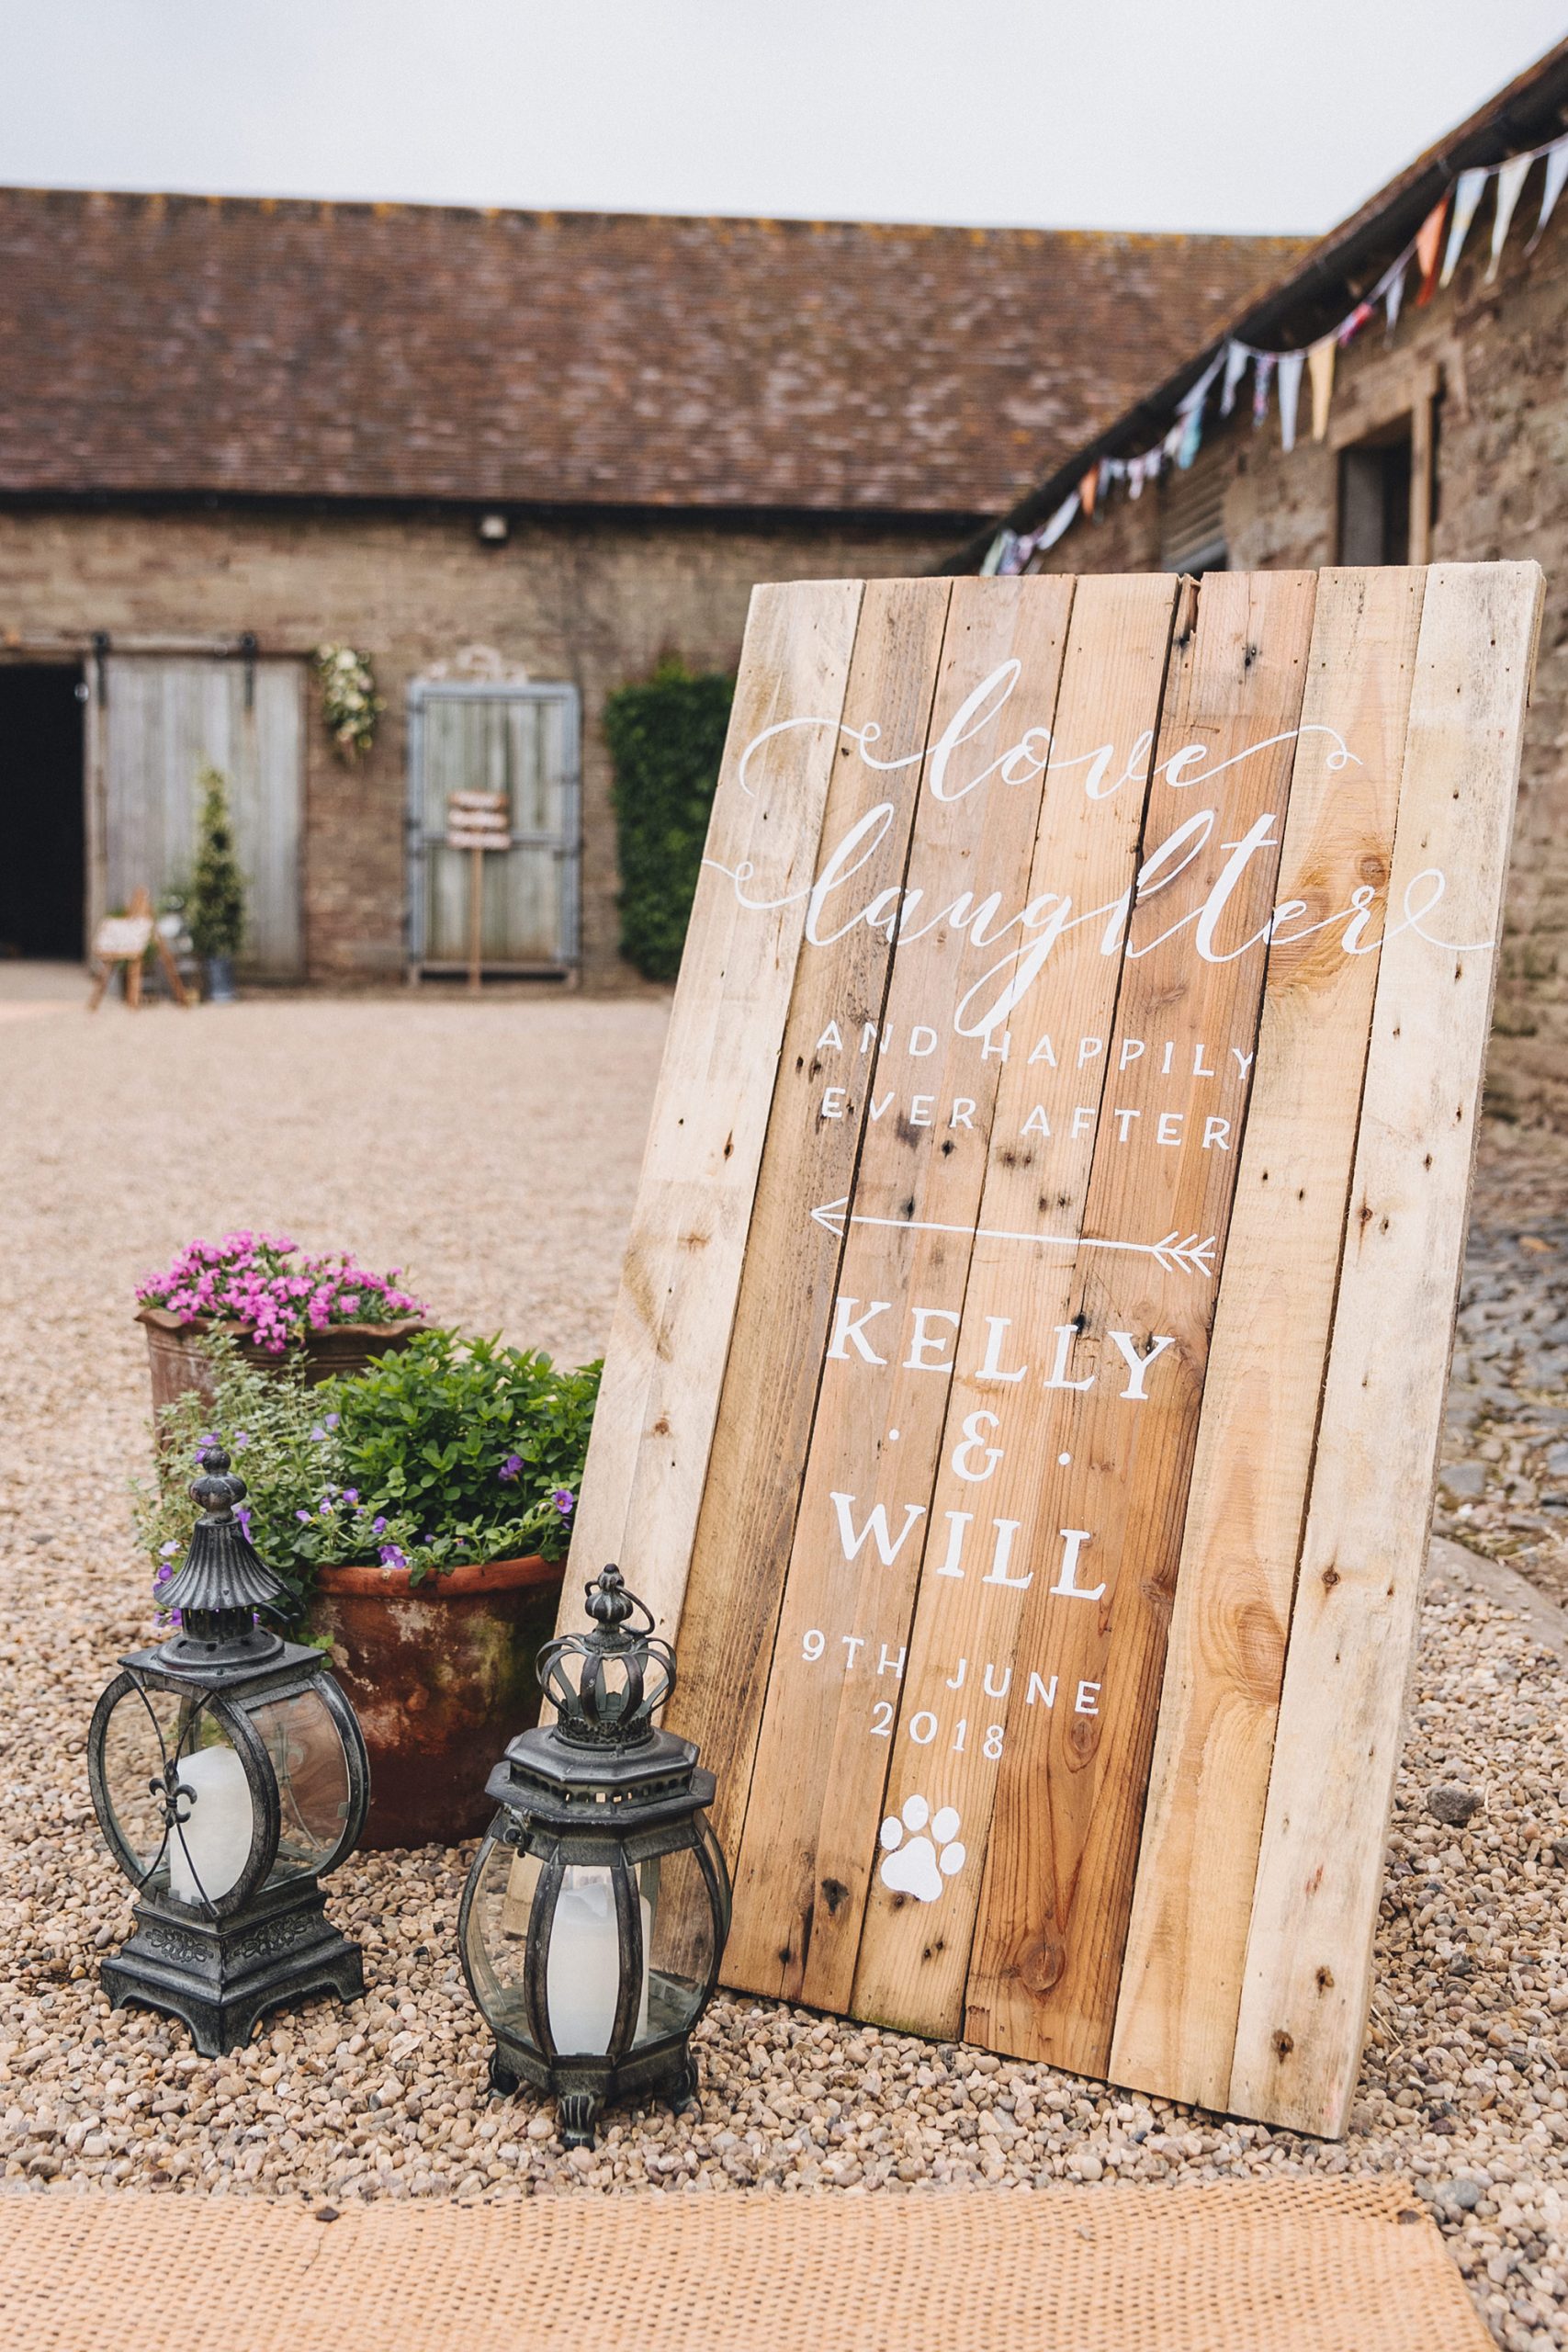 Kelly Will Rustic Country Wedding Marta May Photography SBS 019 scaled